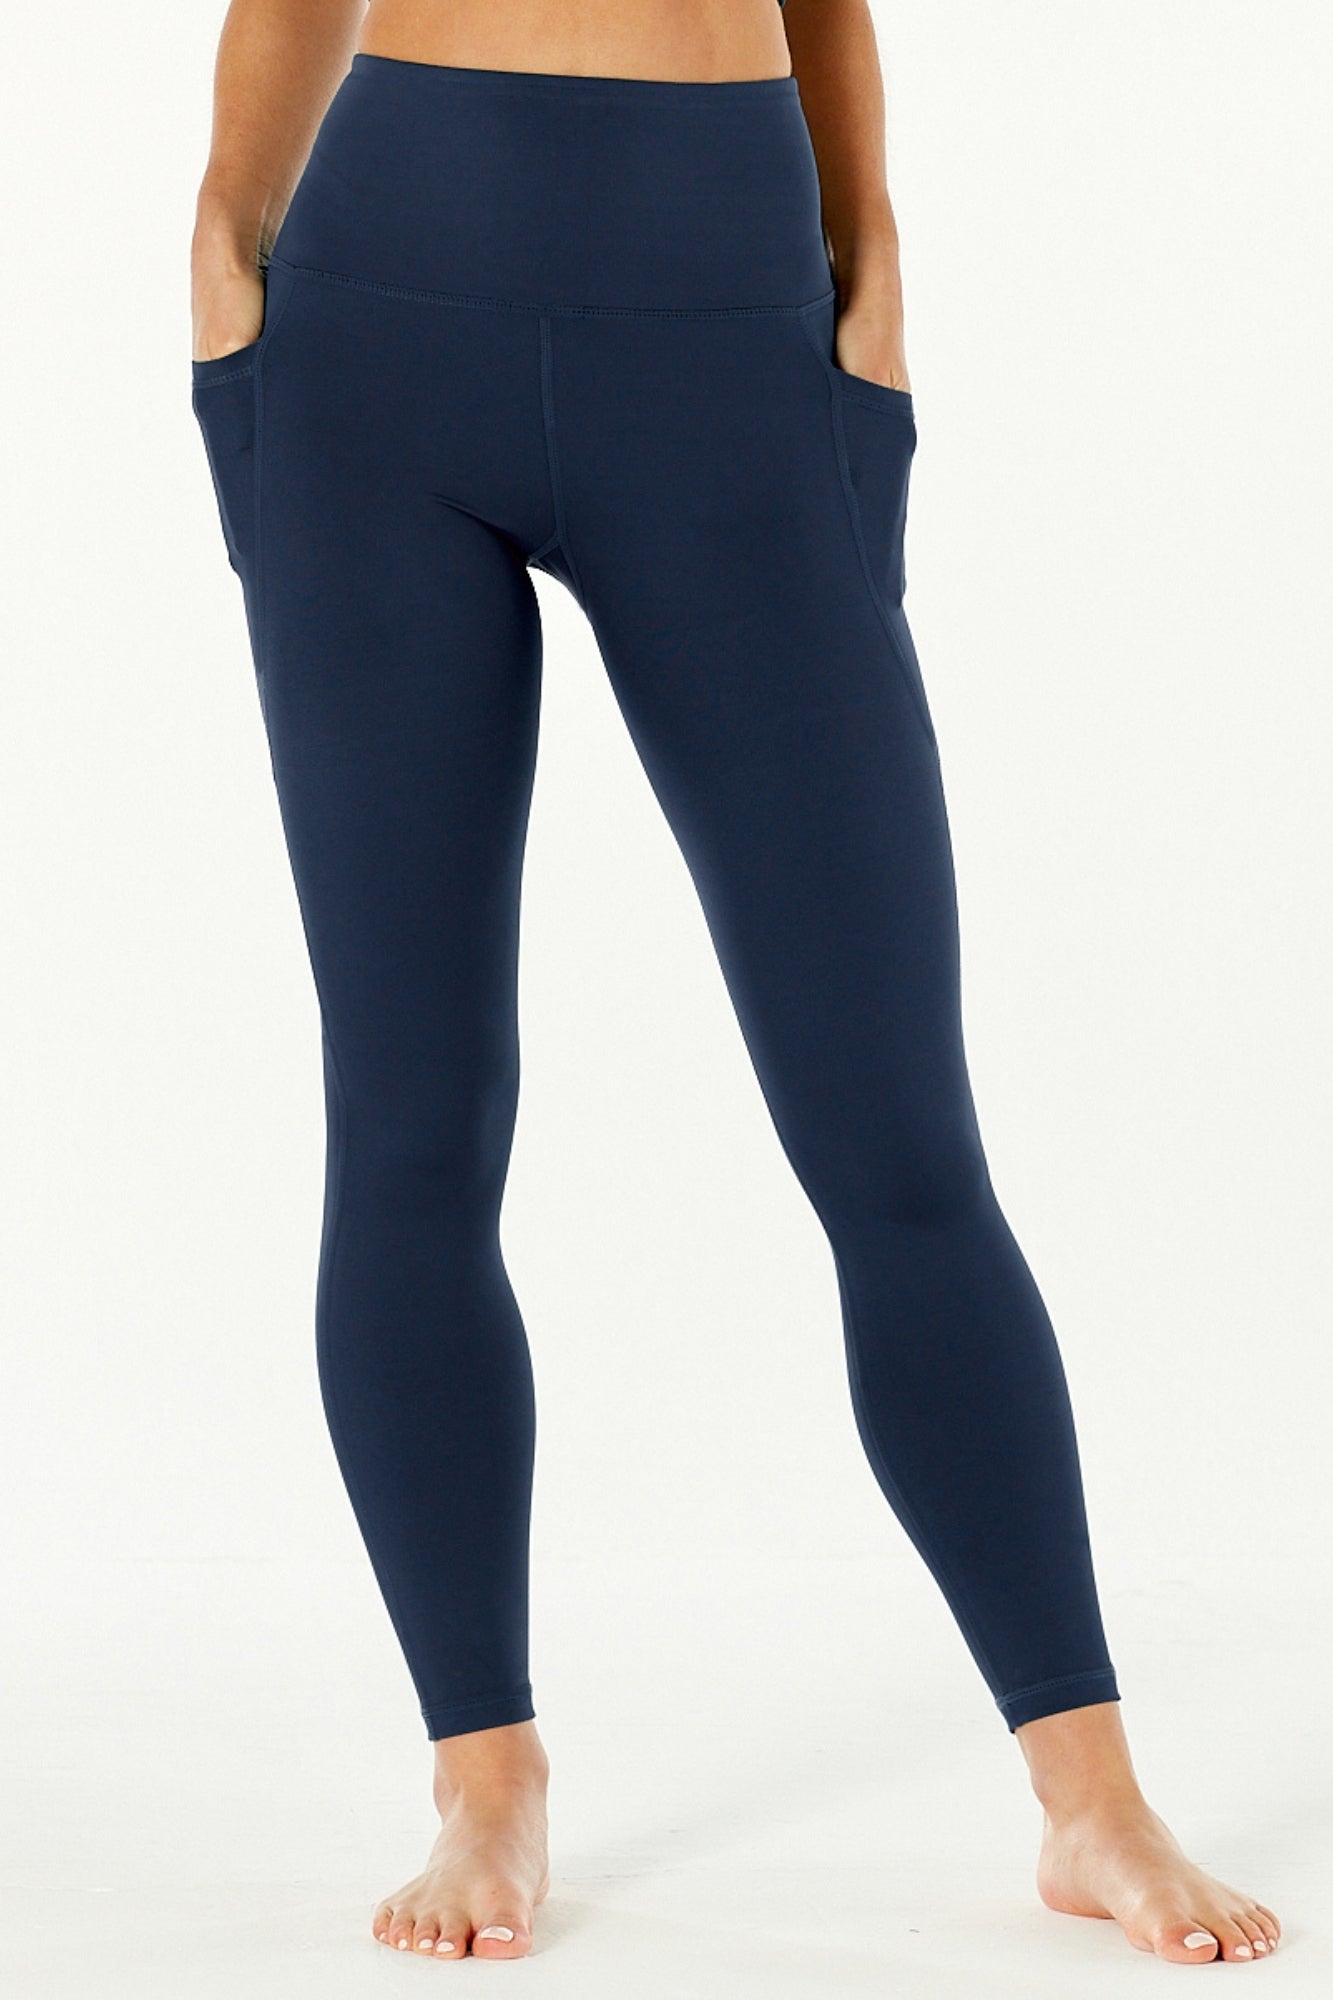 Solid Navy Premium Legging with Yoga Band - Women's One Size